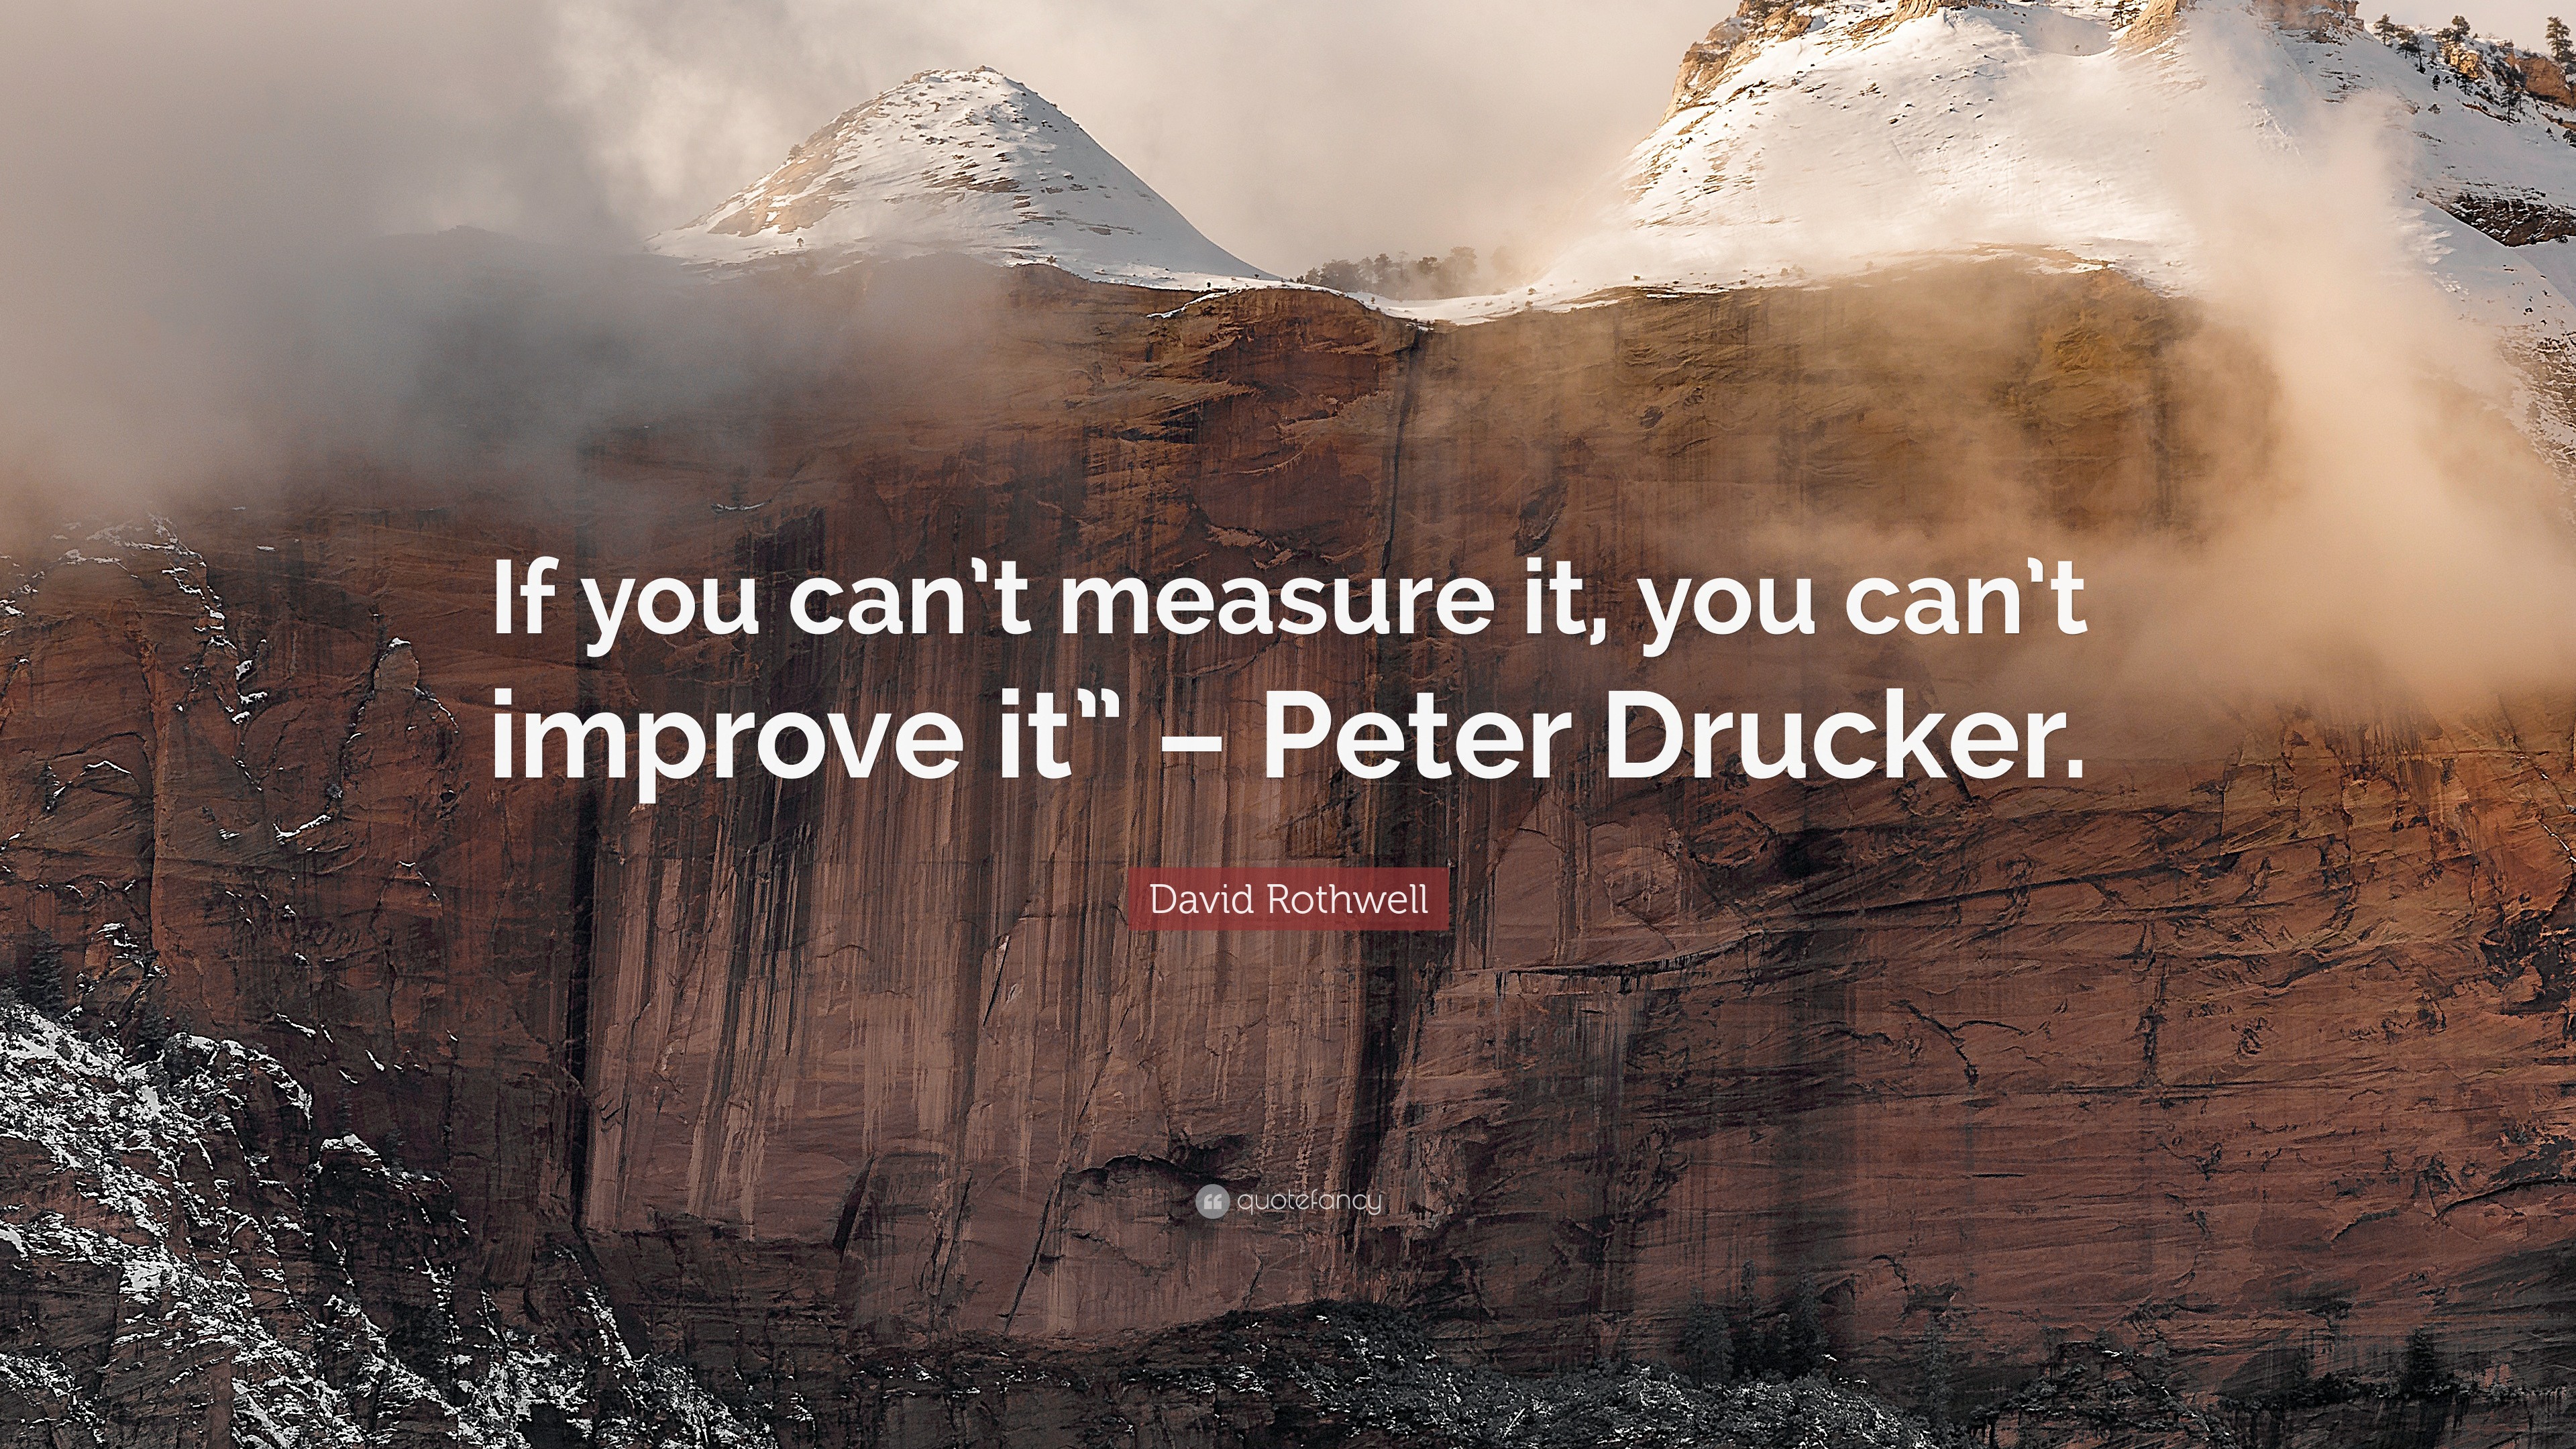 David Rothwell Quote: “If you can't measure it, you can't improve it” –  Peter Drucker.”